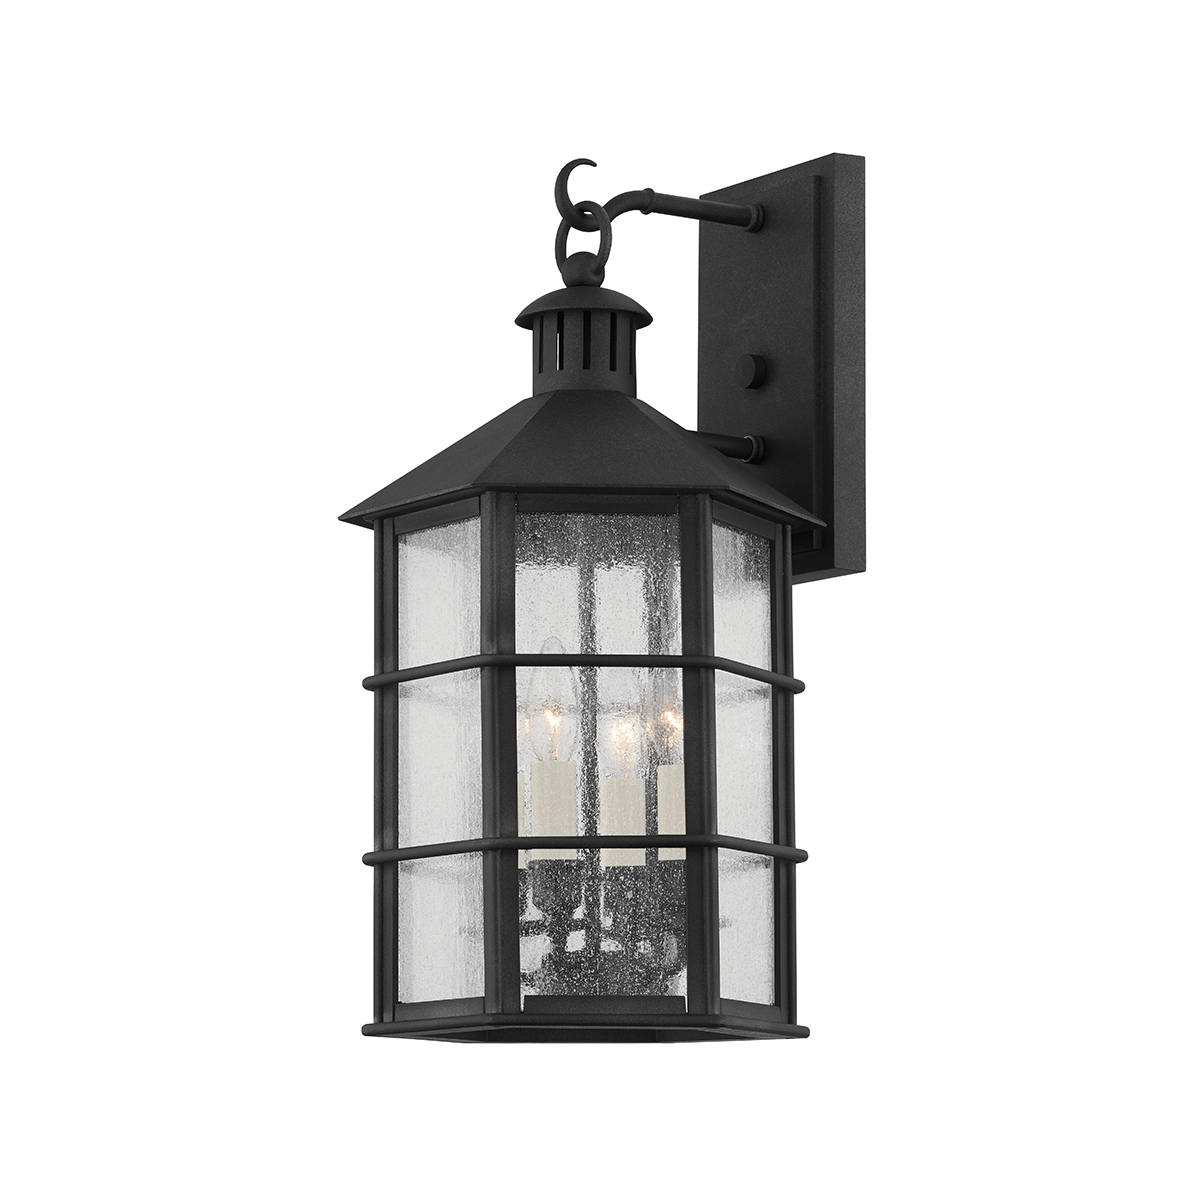 Troy Lighting 4 LIGHT MEDIUM EXTERIOR WALL SCONCE B2512 Outdoor l Wall Troy Lighting FRENCH IRON  